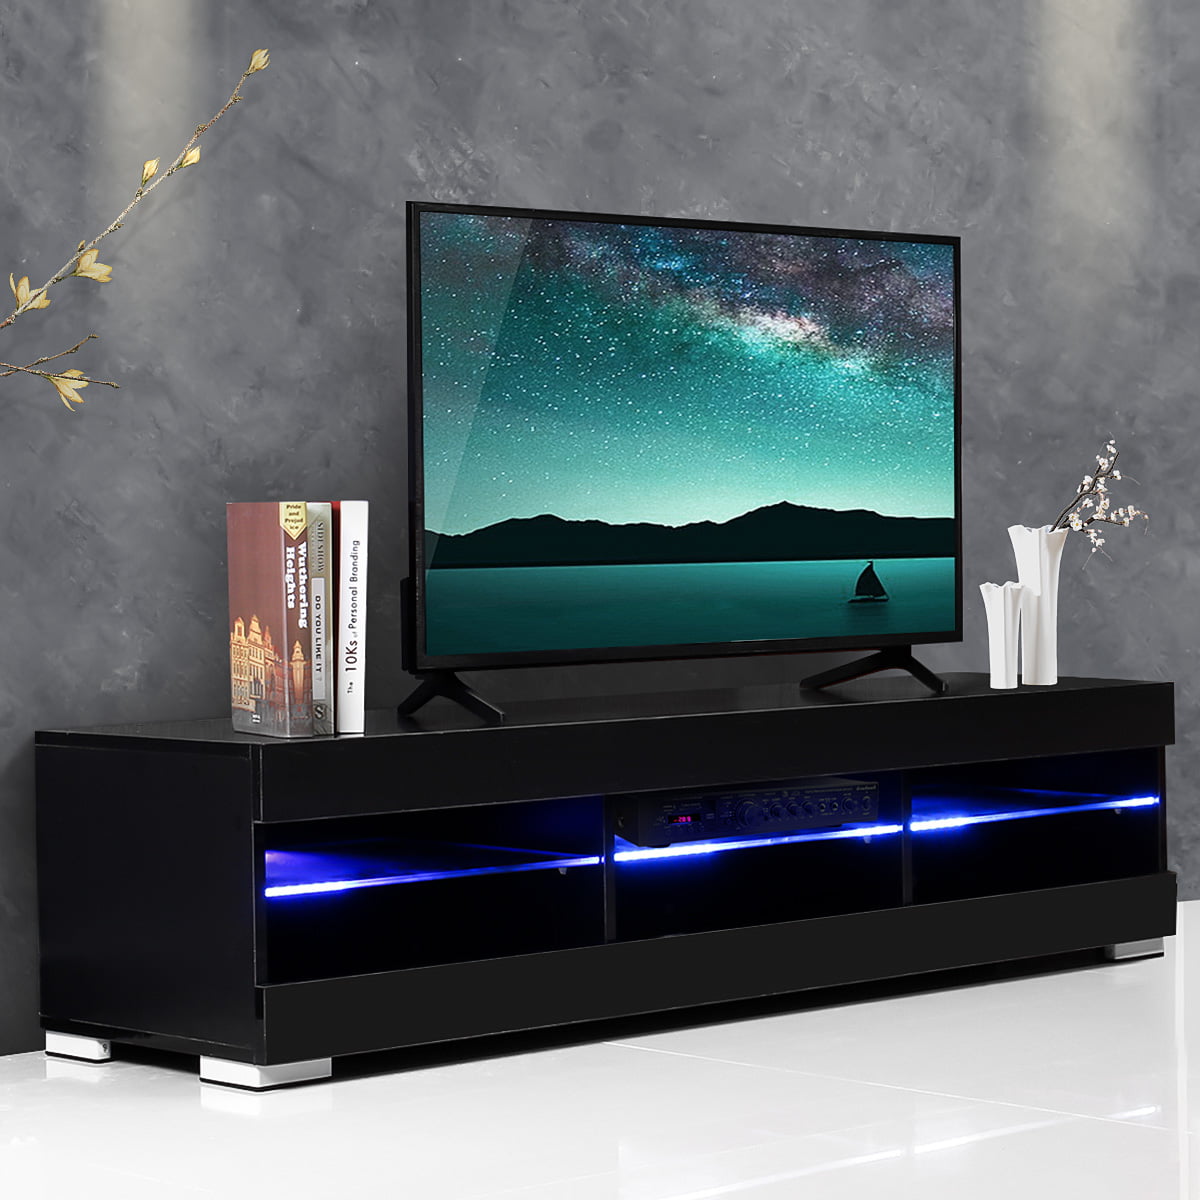 57'' TV Stand Modern Decorative Cabinet with Multi-mode LED Lights